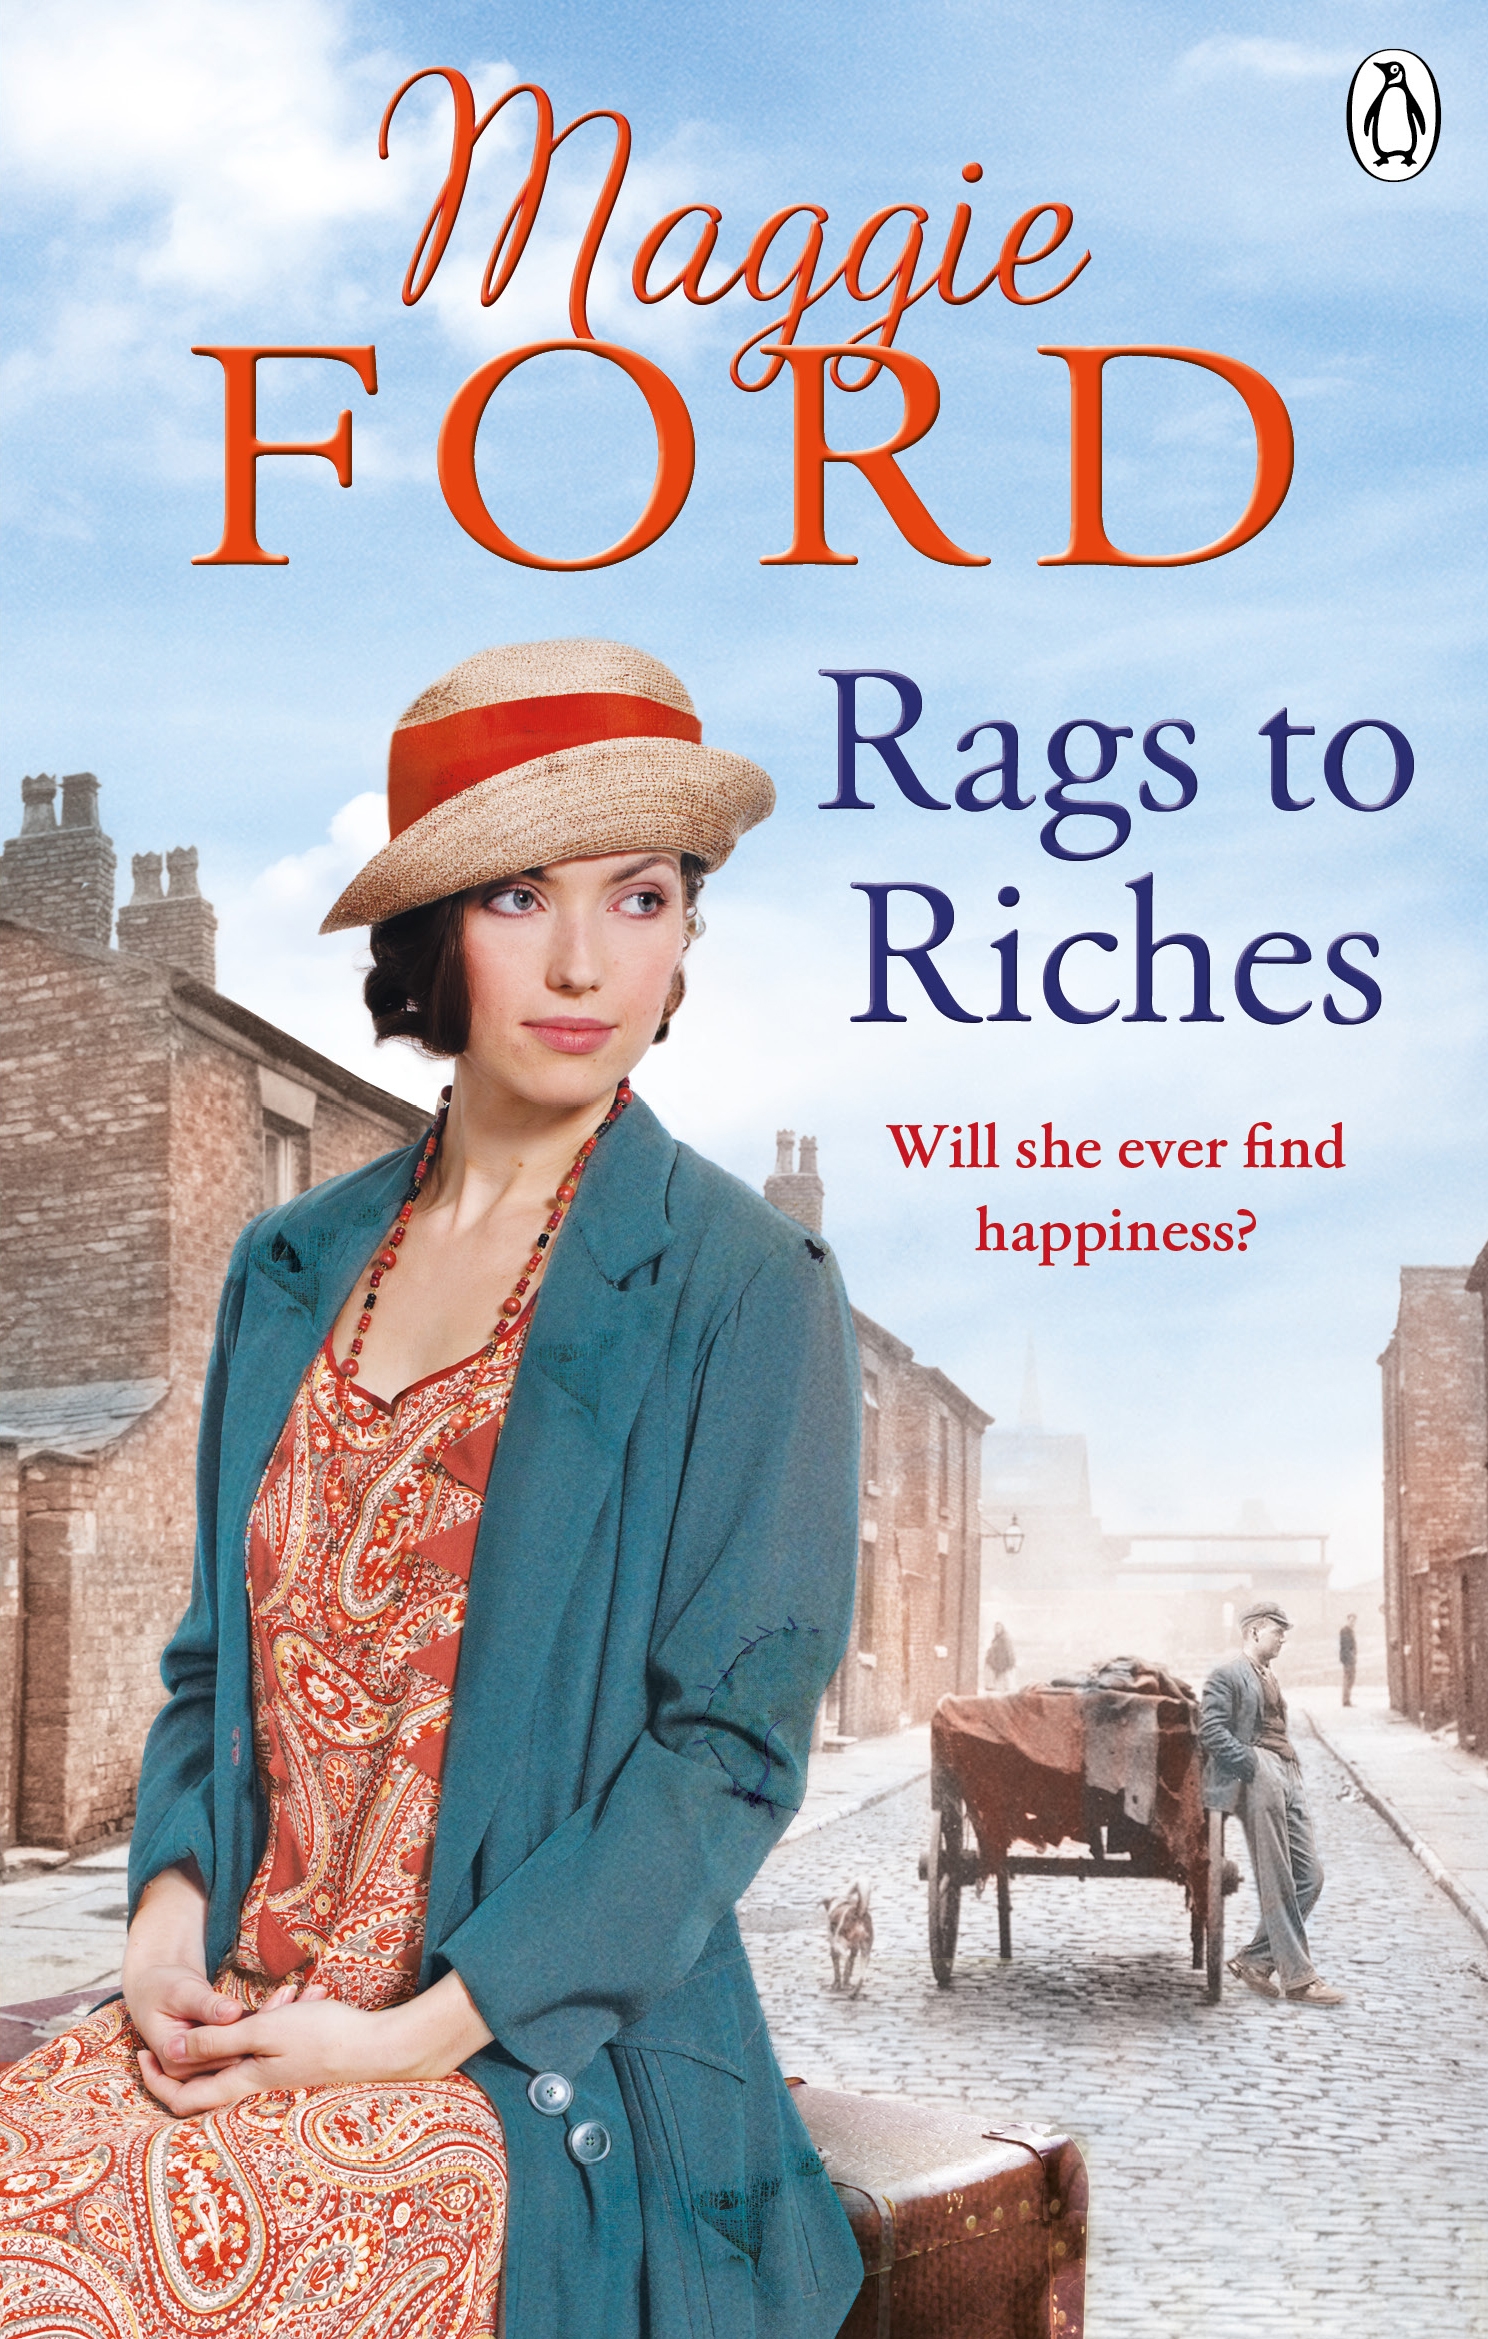 Rags to Riches by Maggie Ford - Penguin Books Australia